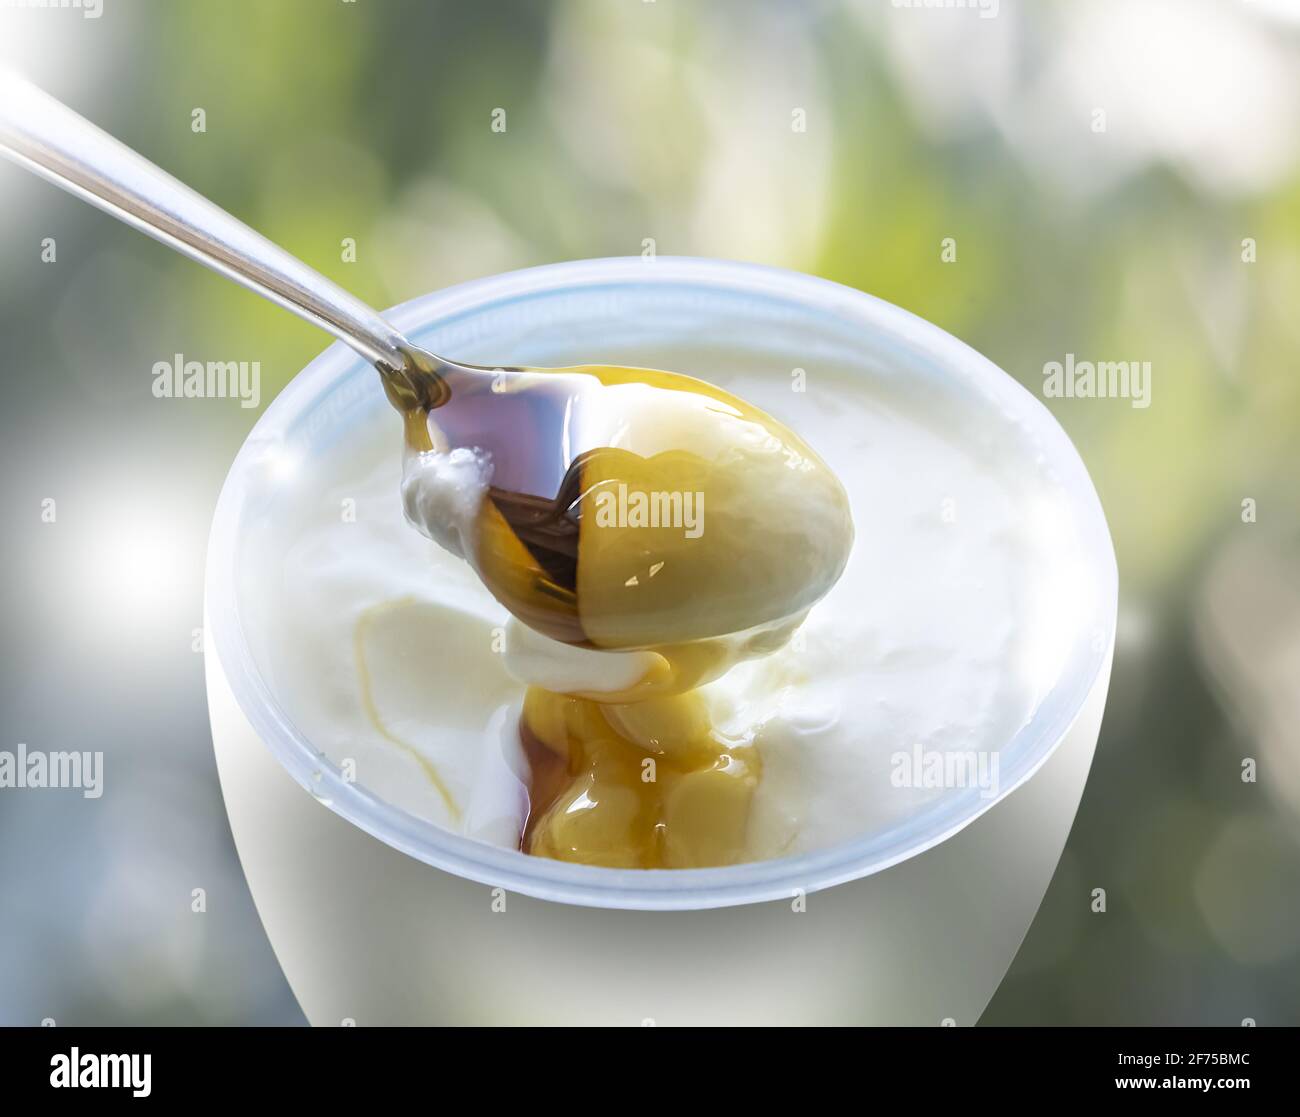 Photo for Advertising : Greek Yoghurt With Spoon Full of Honey Inviting for meal on blurred Bokeh Background. Copy Space. Stock Photo